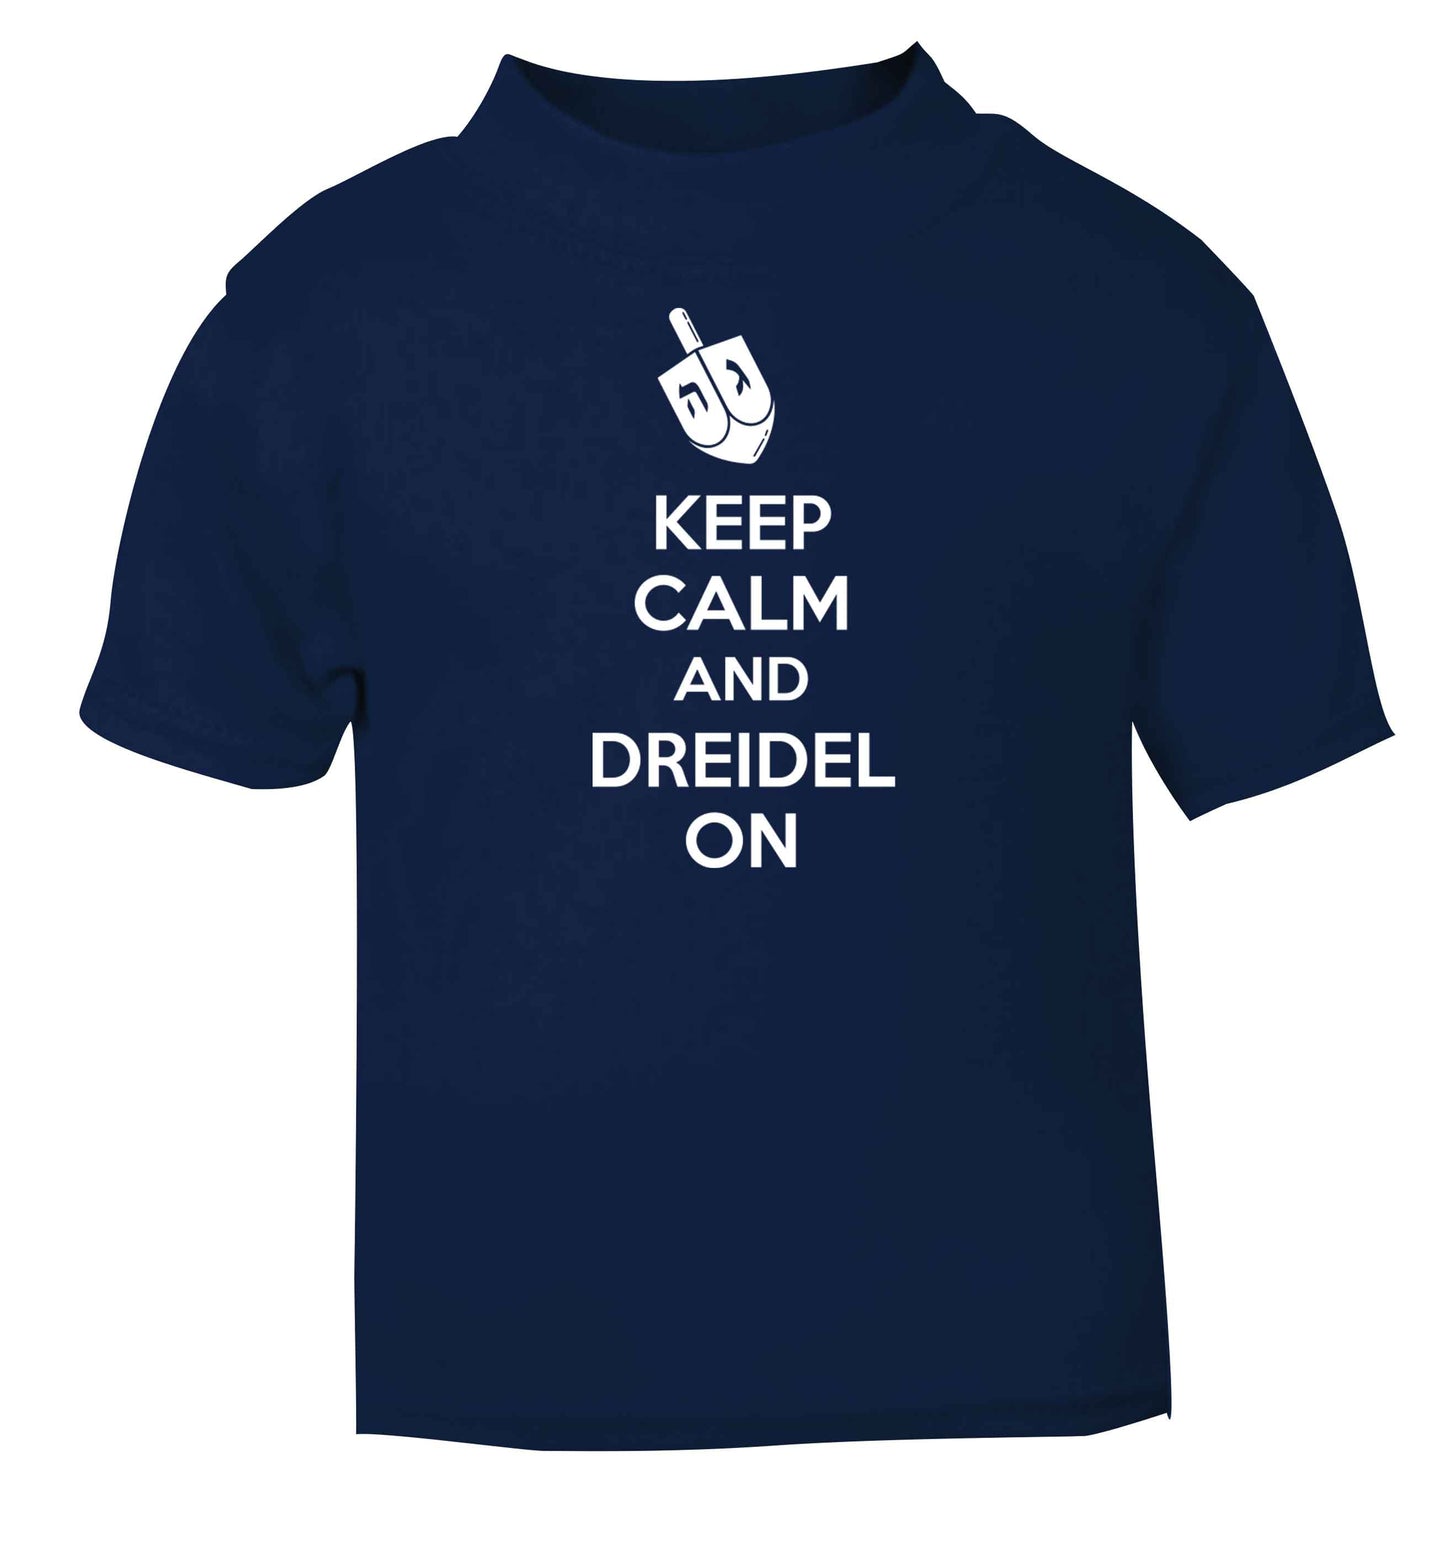 Keep calm and dreidel on navy baby toddler Tshirt 2 Years